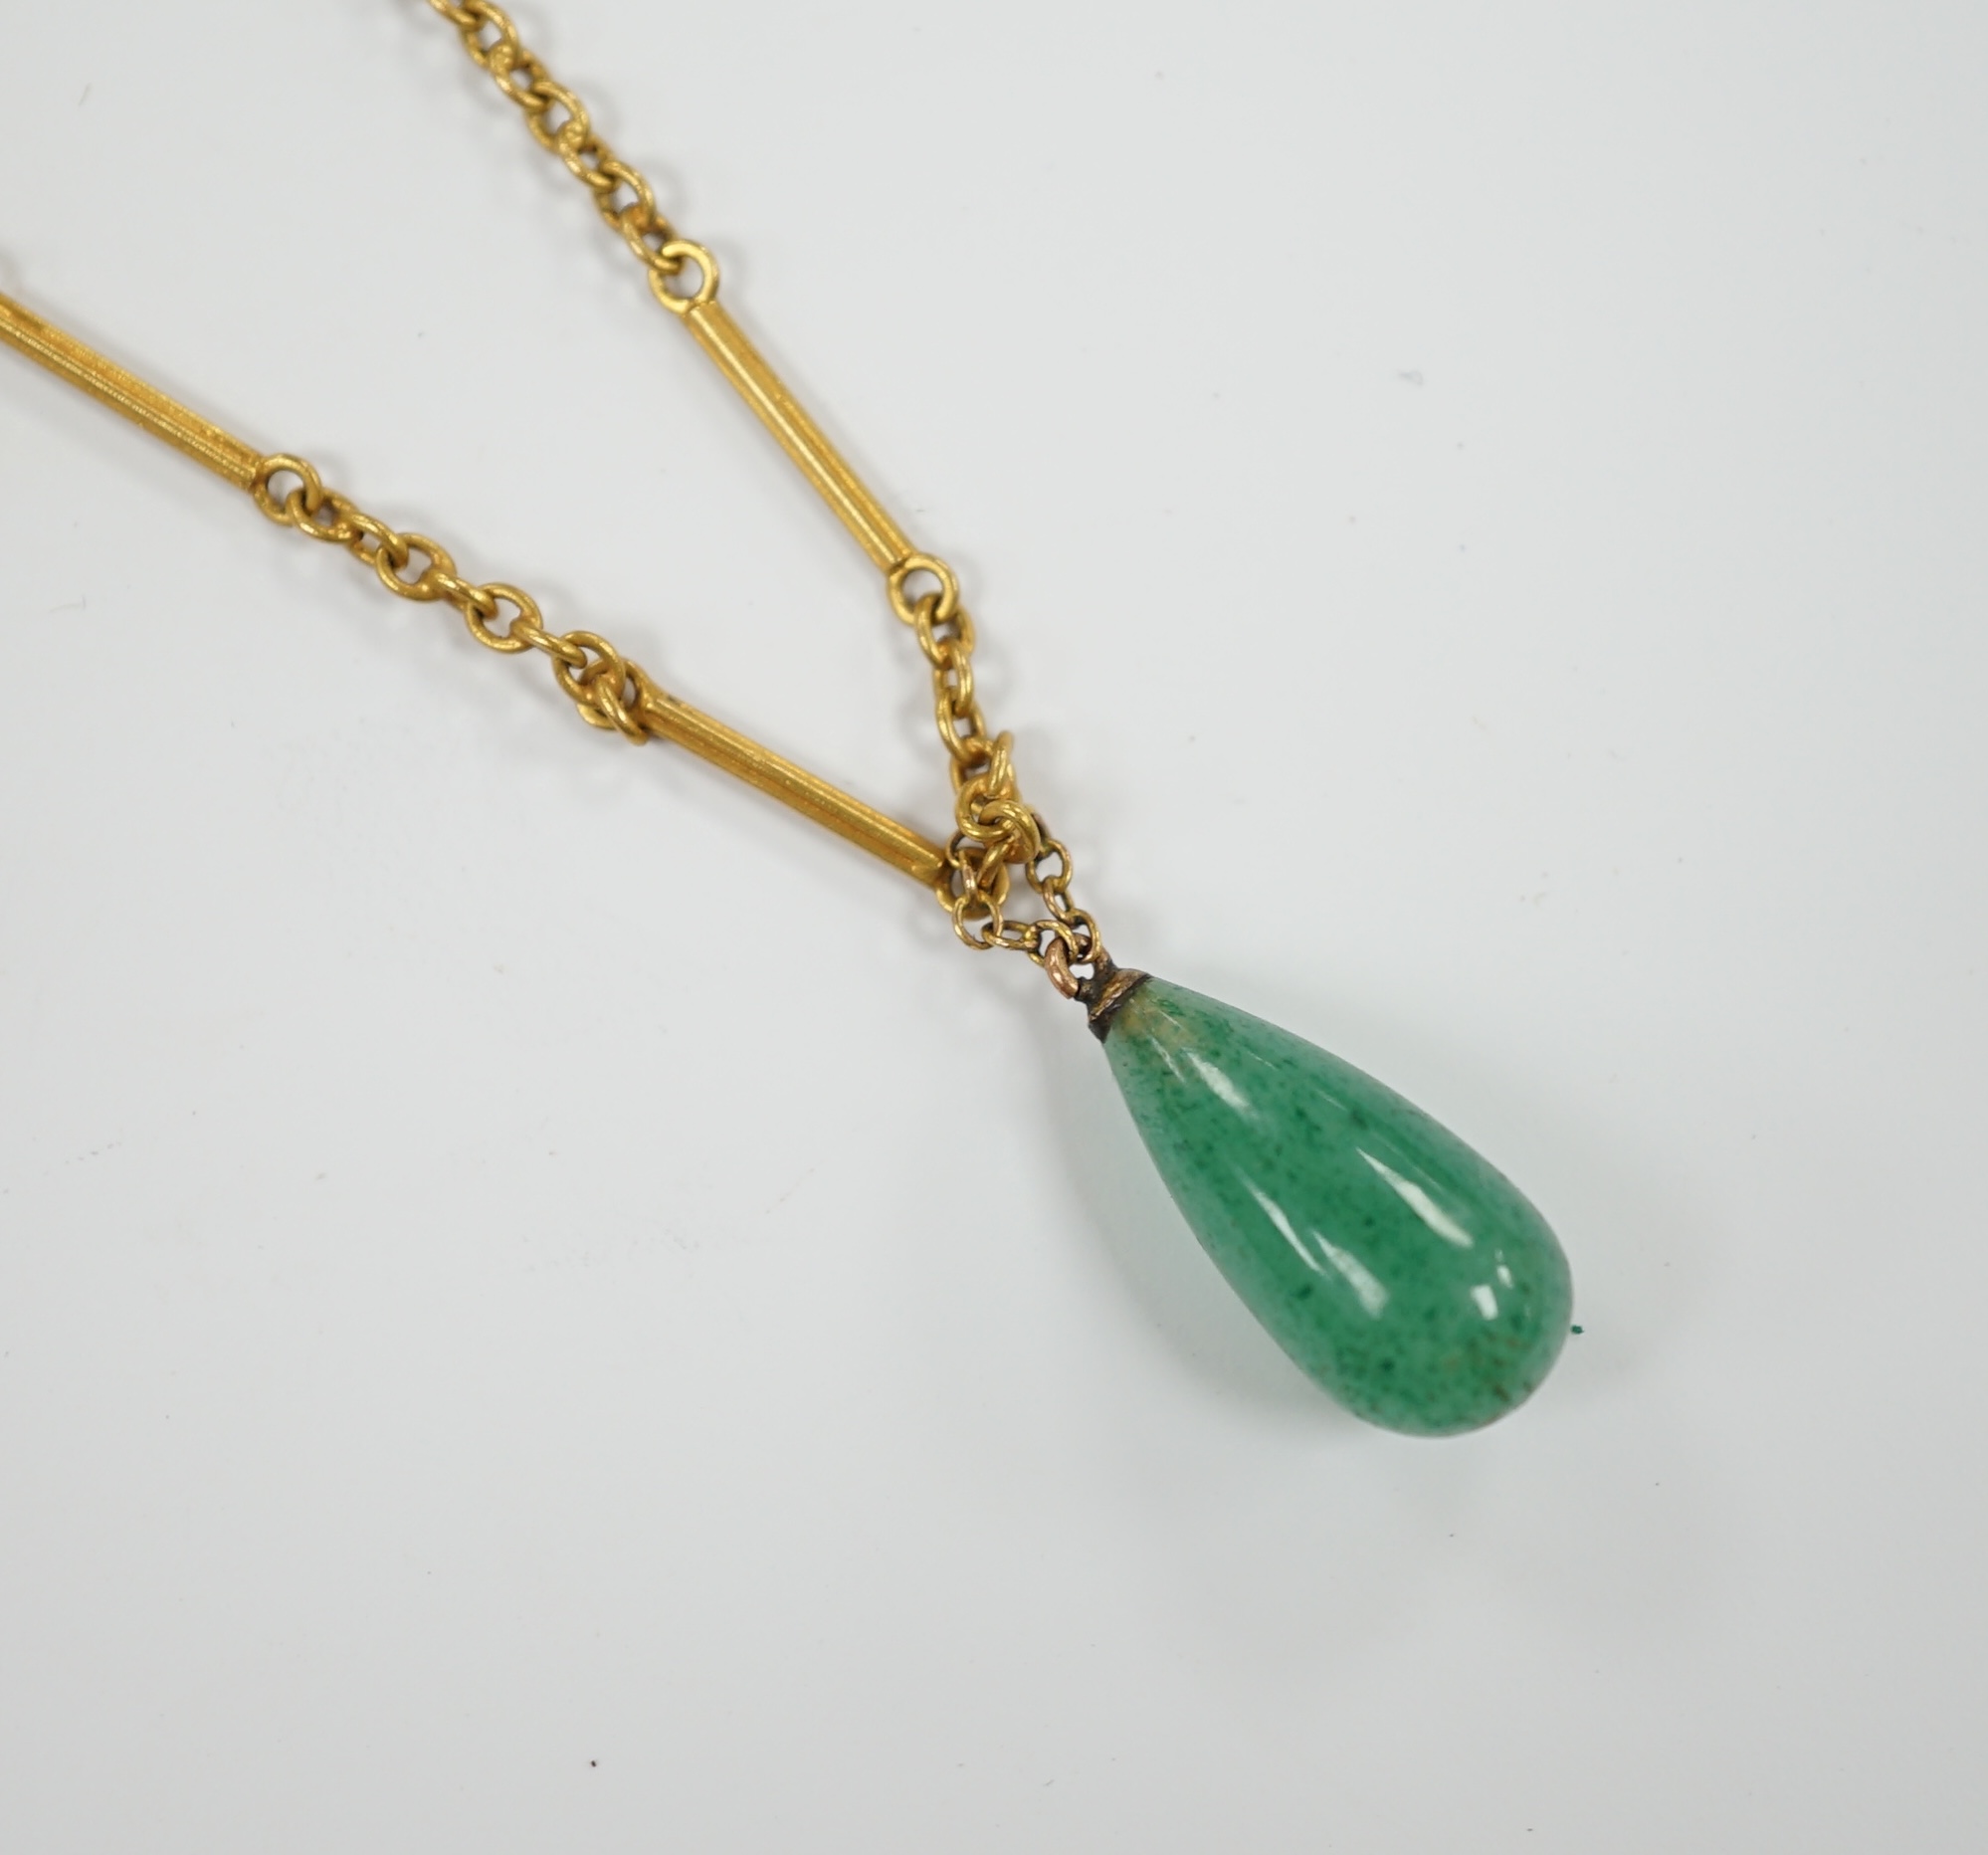 An early 20th century 15ct and single stone pear shaped simulated jade set pendant necklace, overall 46cm, gross weight 6 grams.